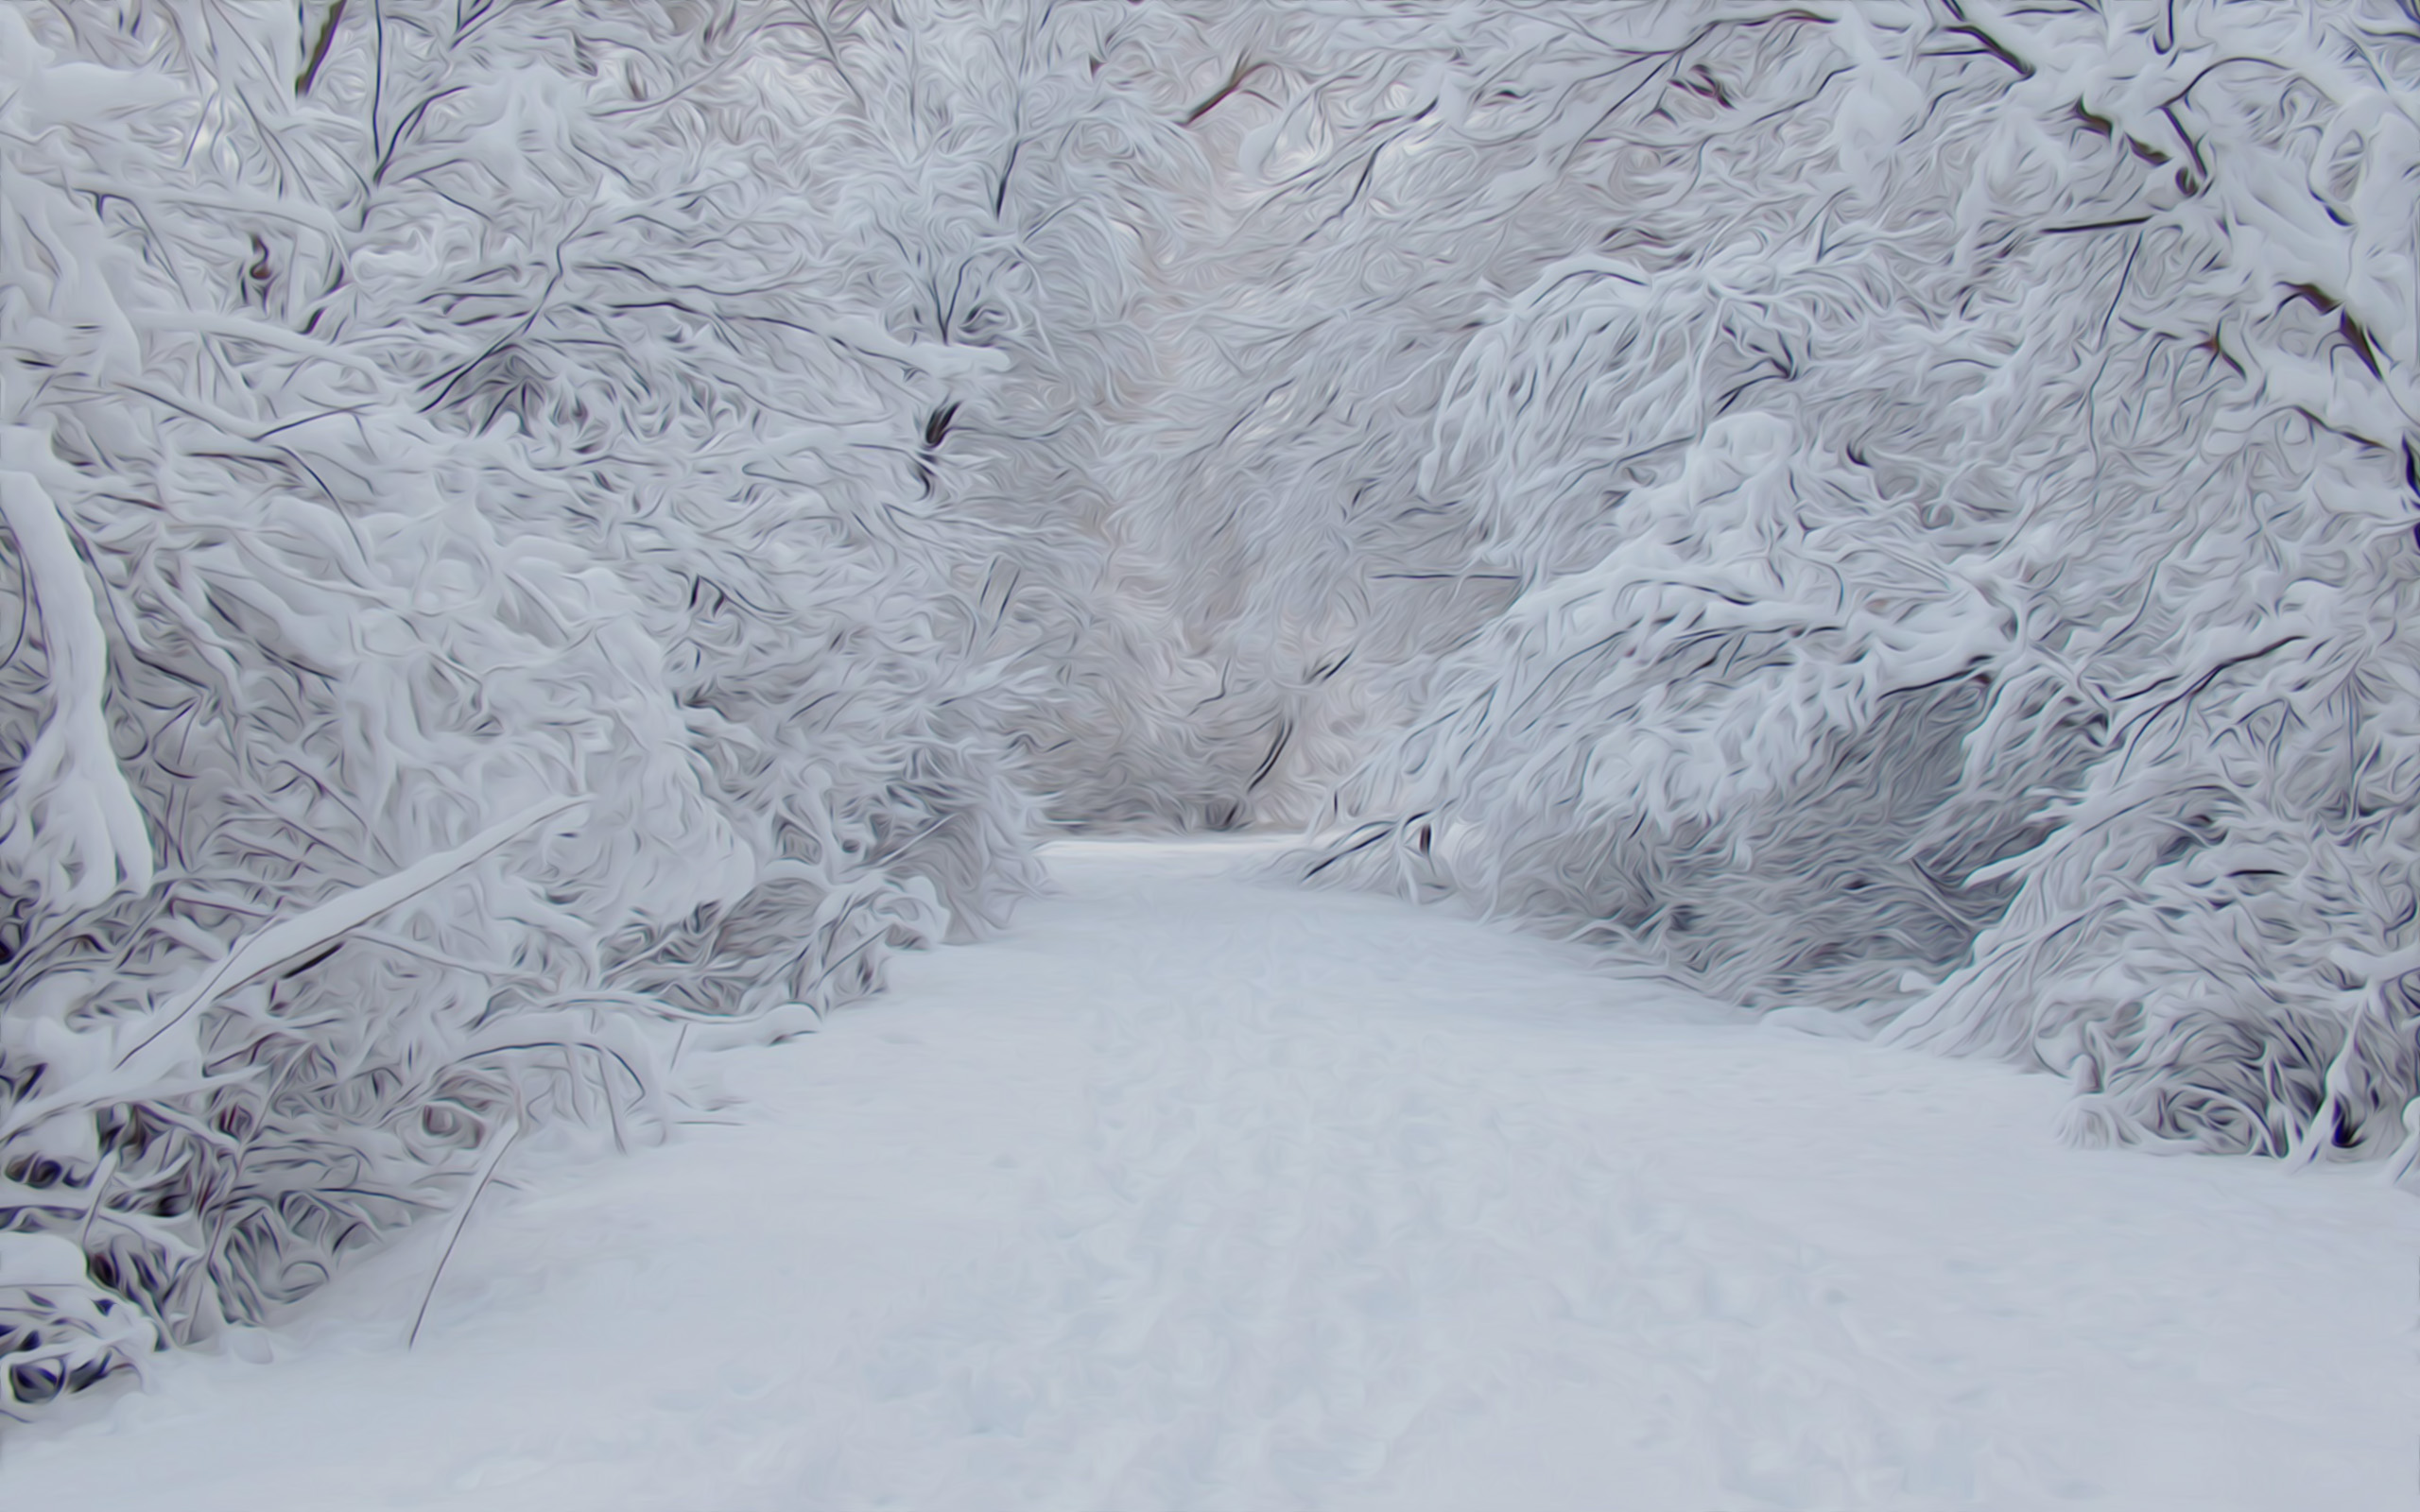 Free download Winter images snowy snow HD wallpaper and background